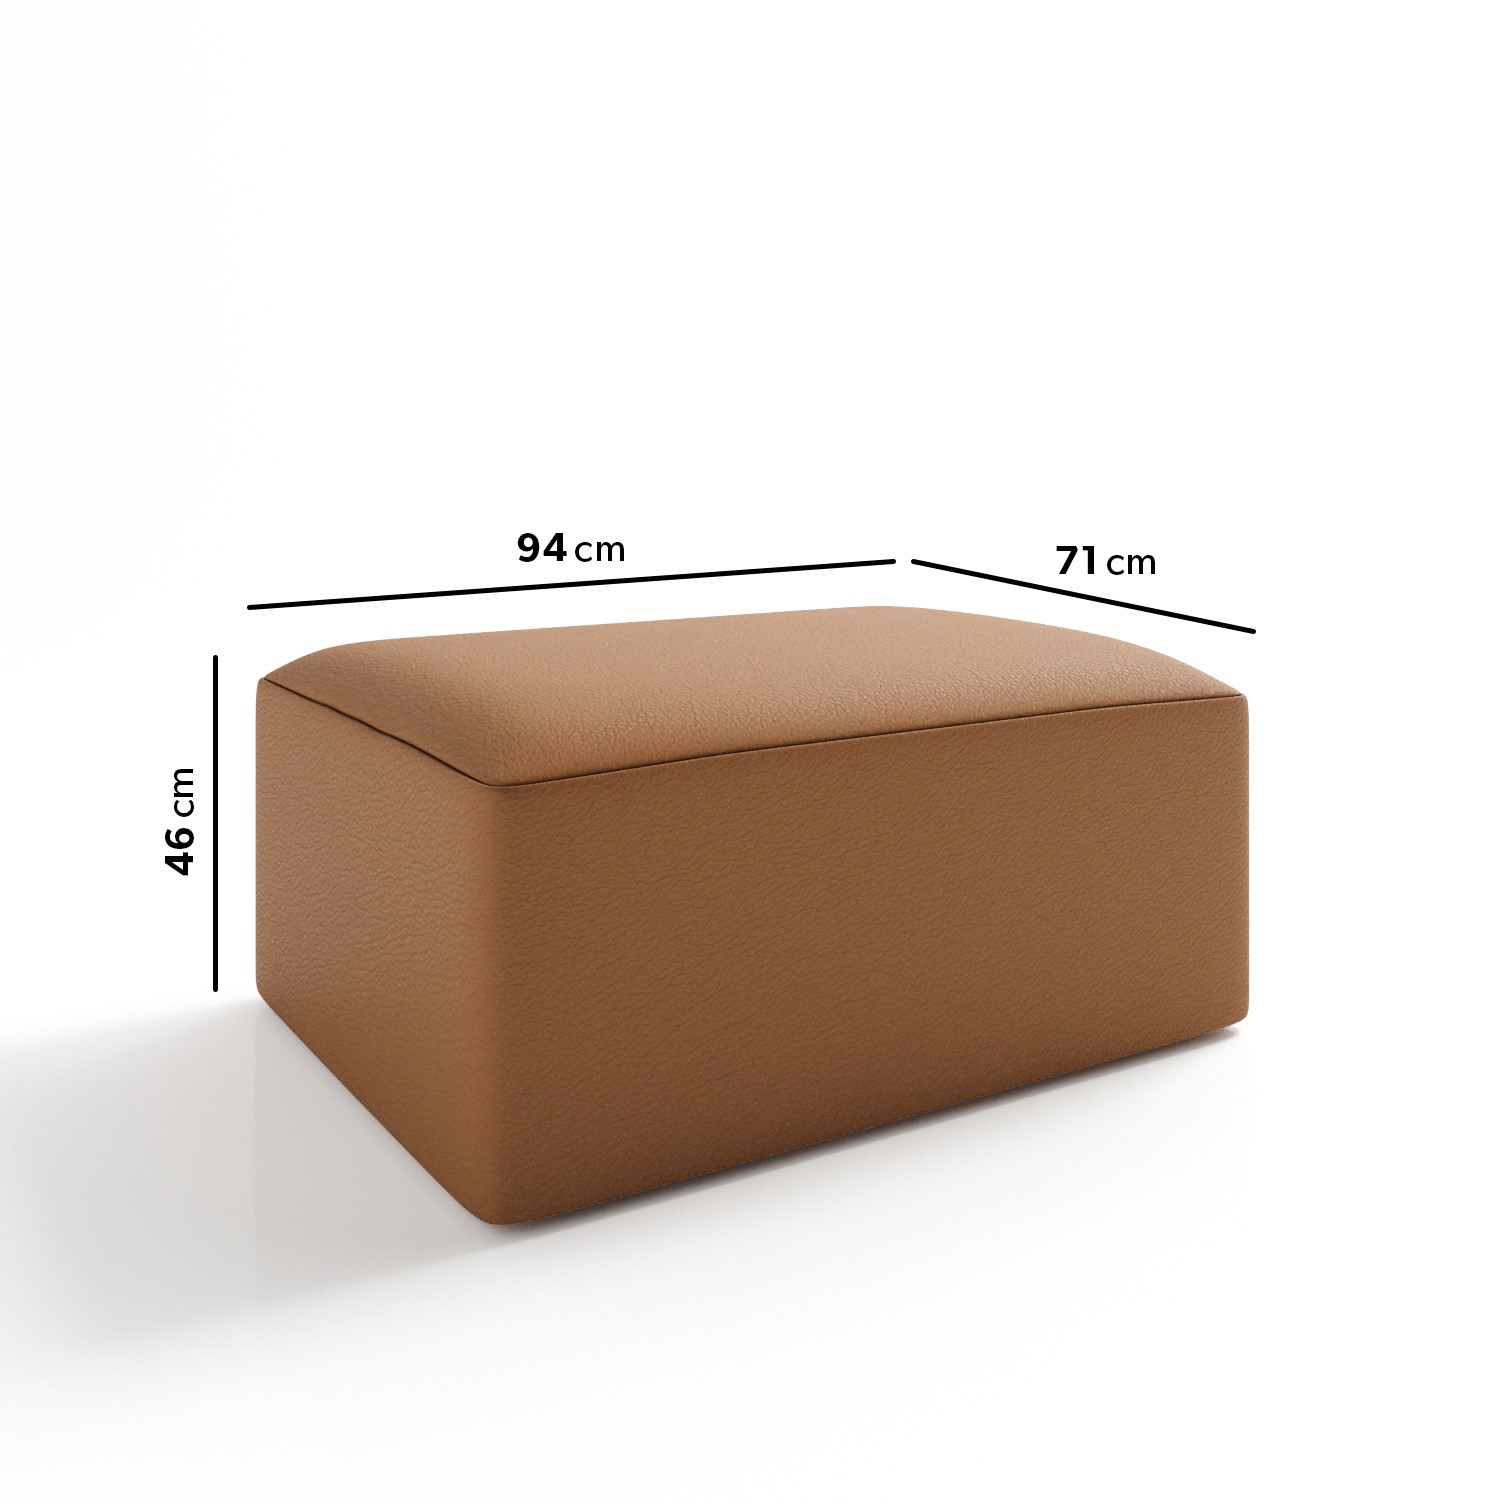 Read more about Hendrix tan pu leather footstool